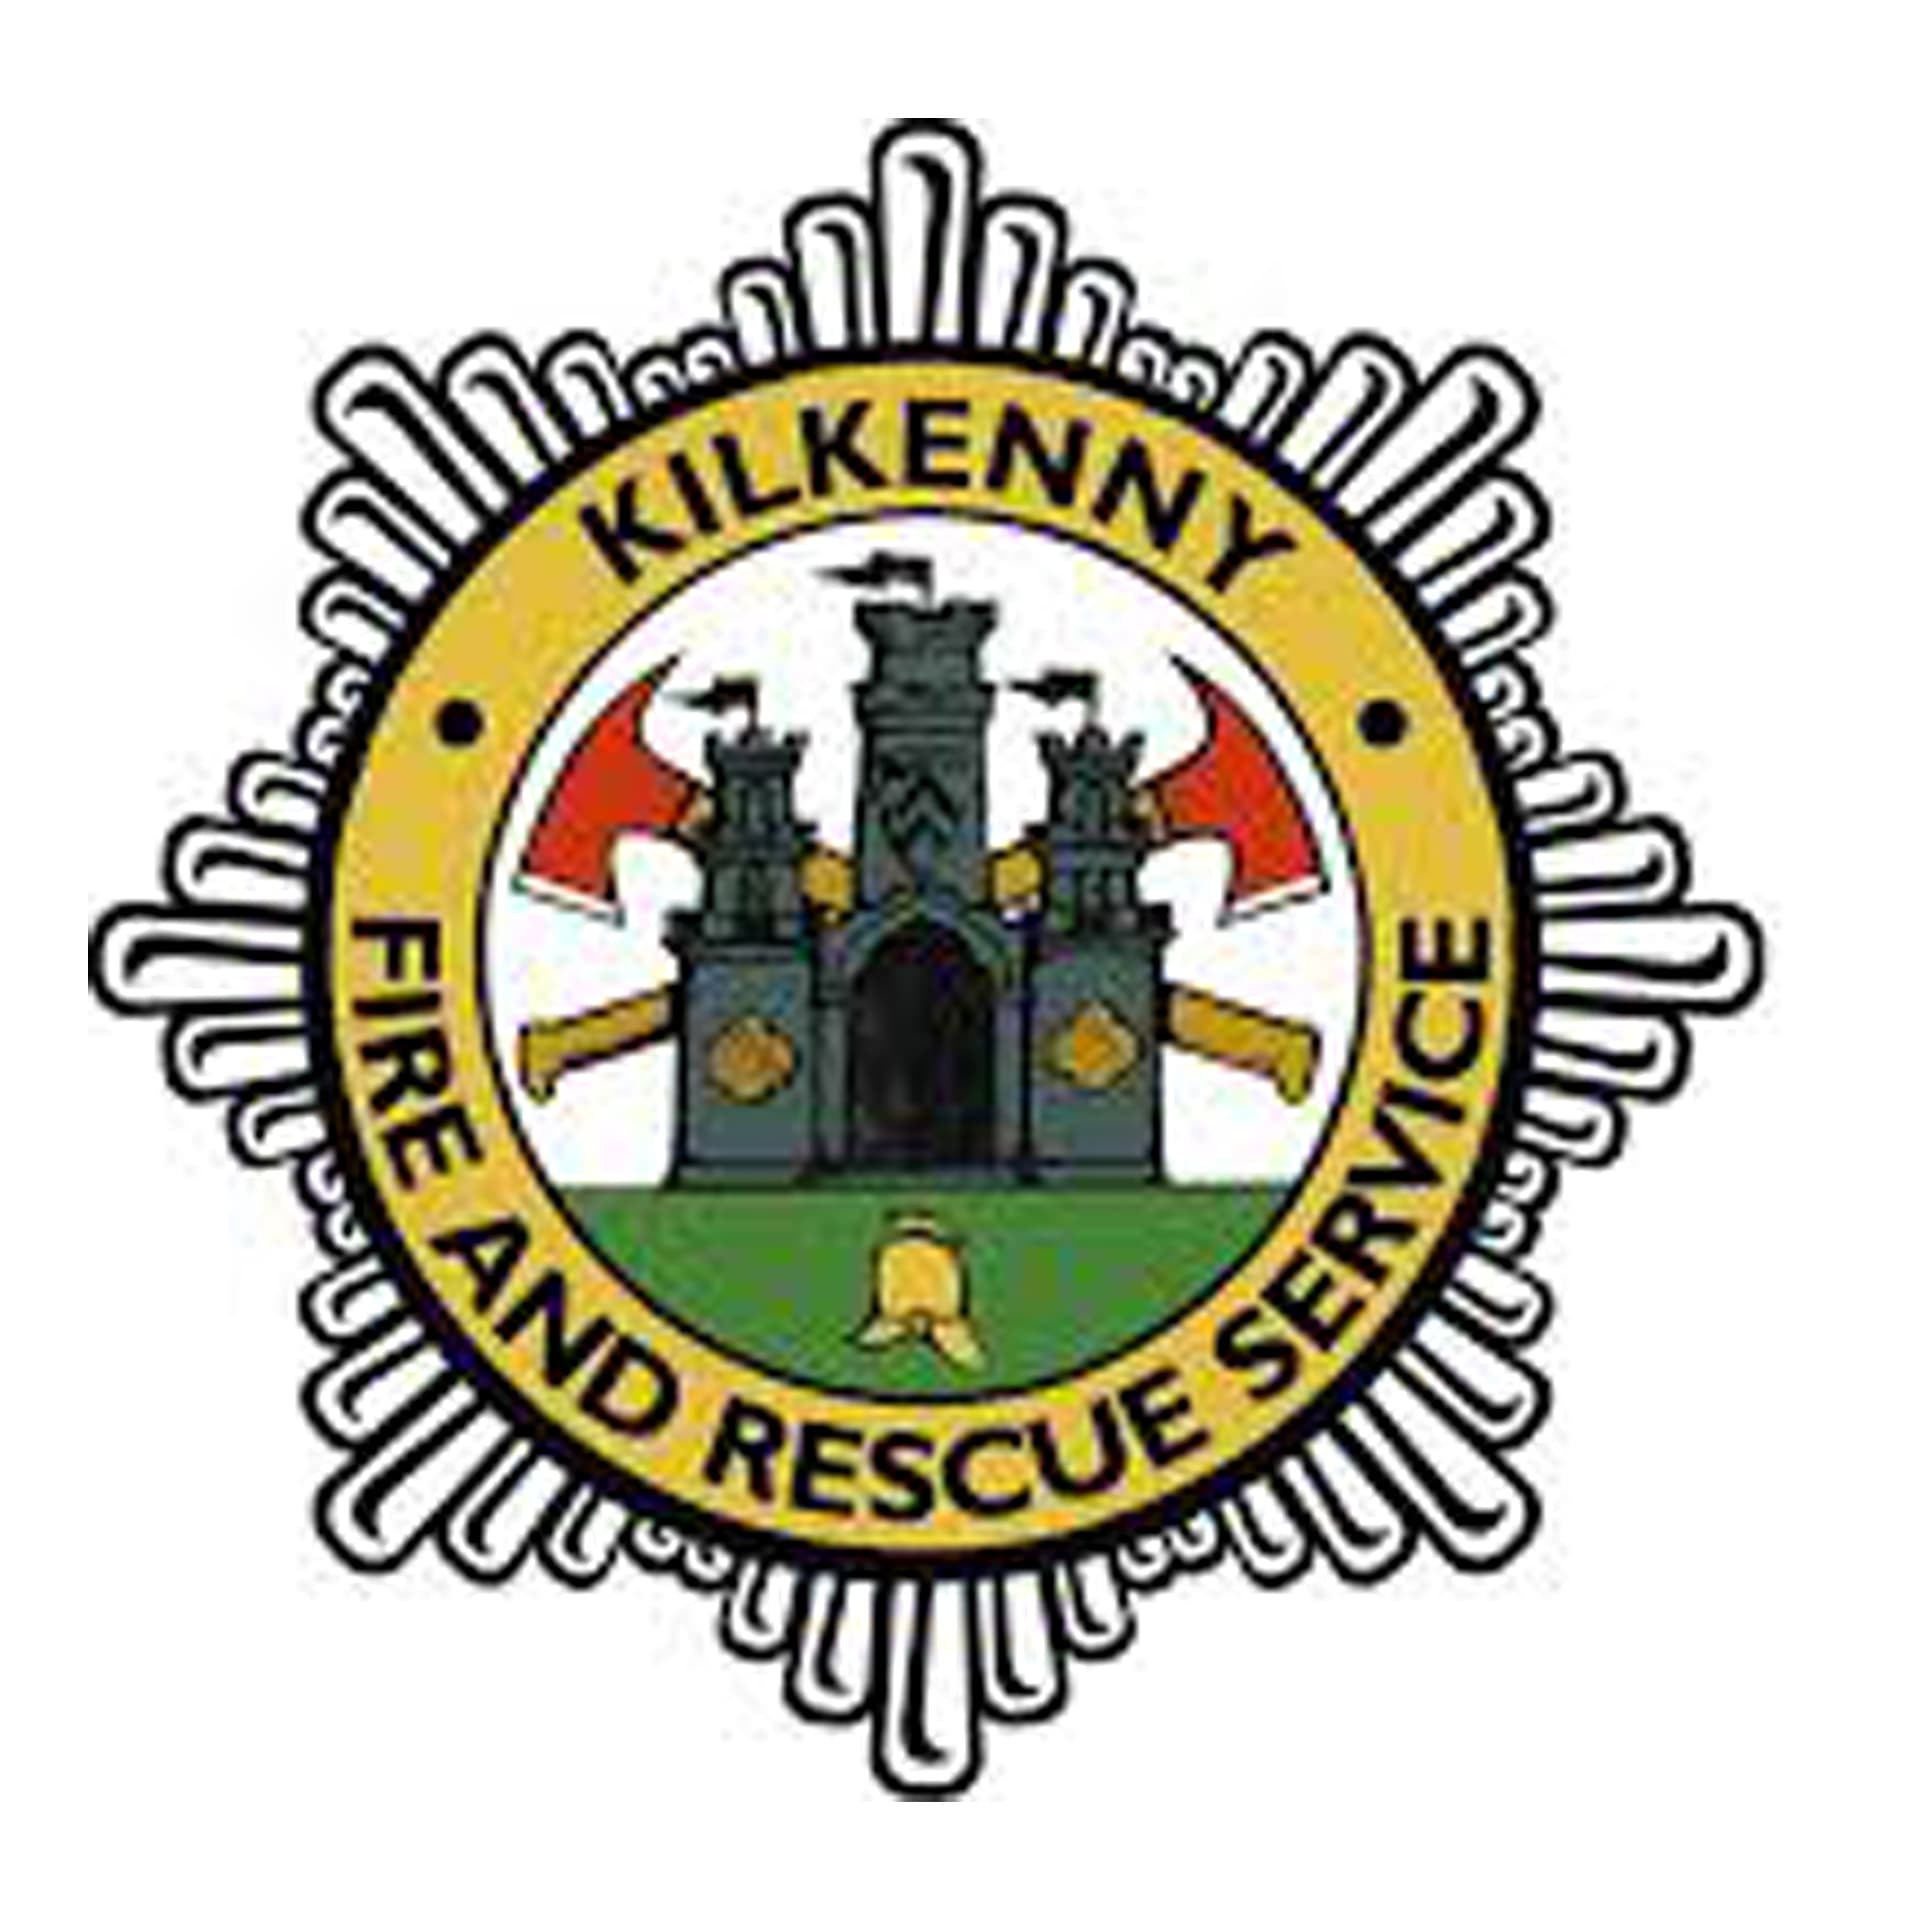 Kilkenny Fire and Rescue Service